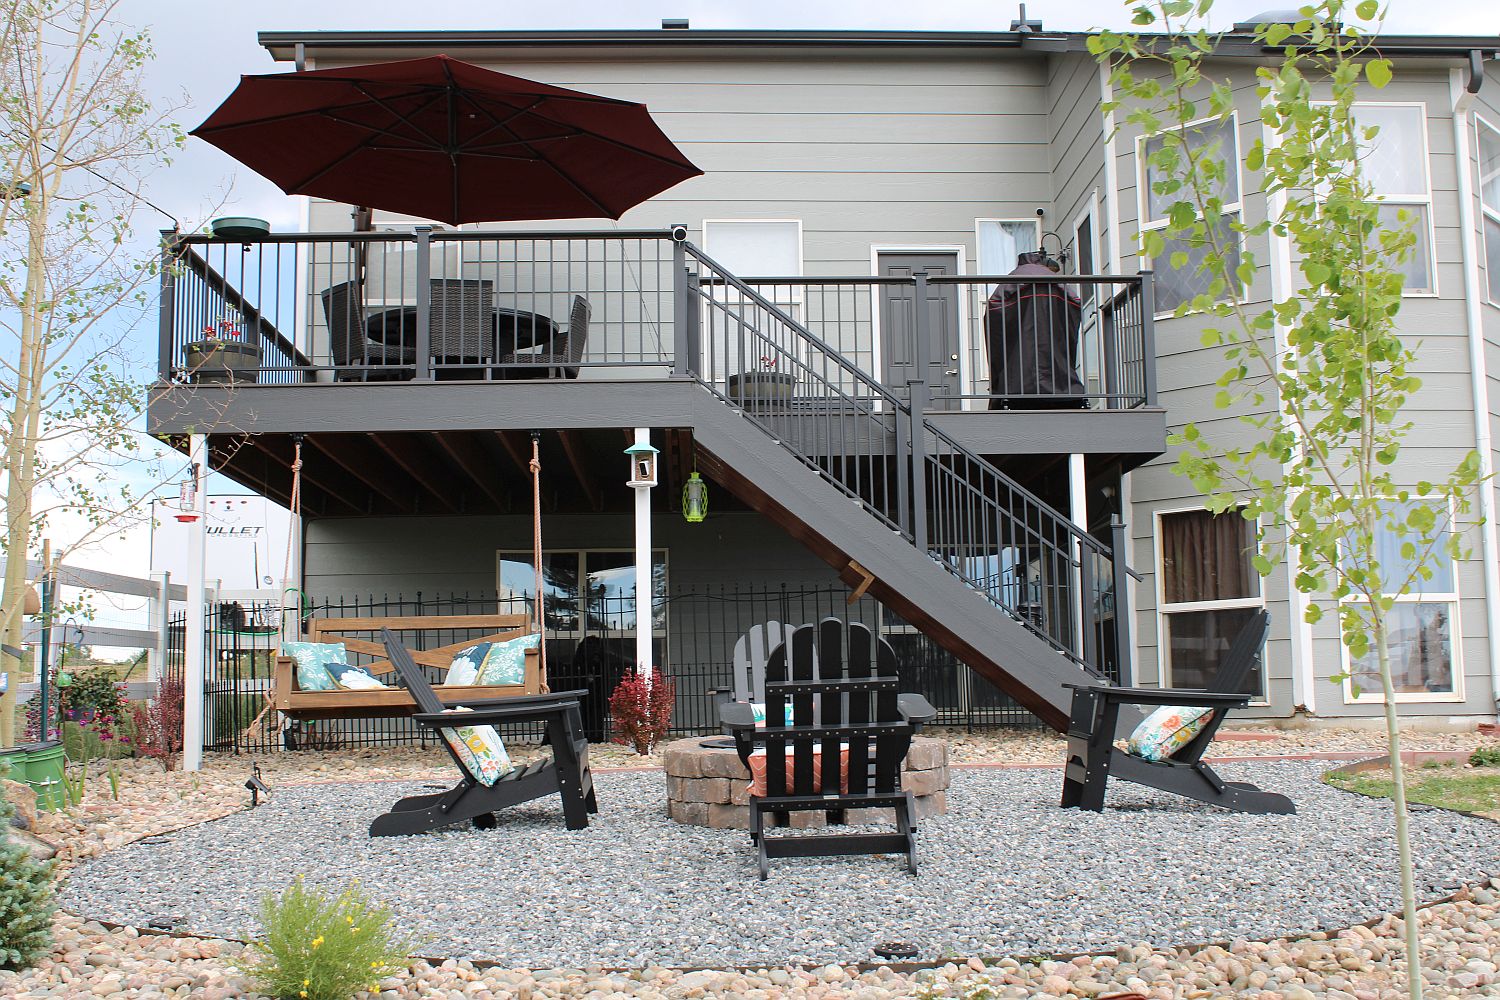 Outdoor living area consisting of fire pit and chairs and an elevated composite deck.